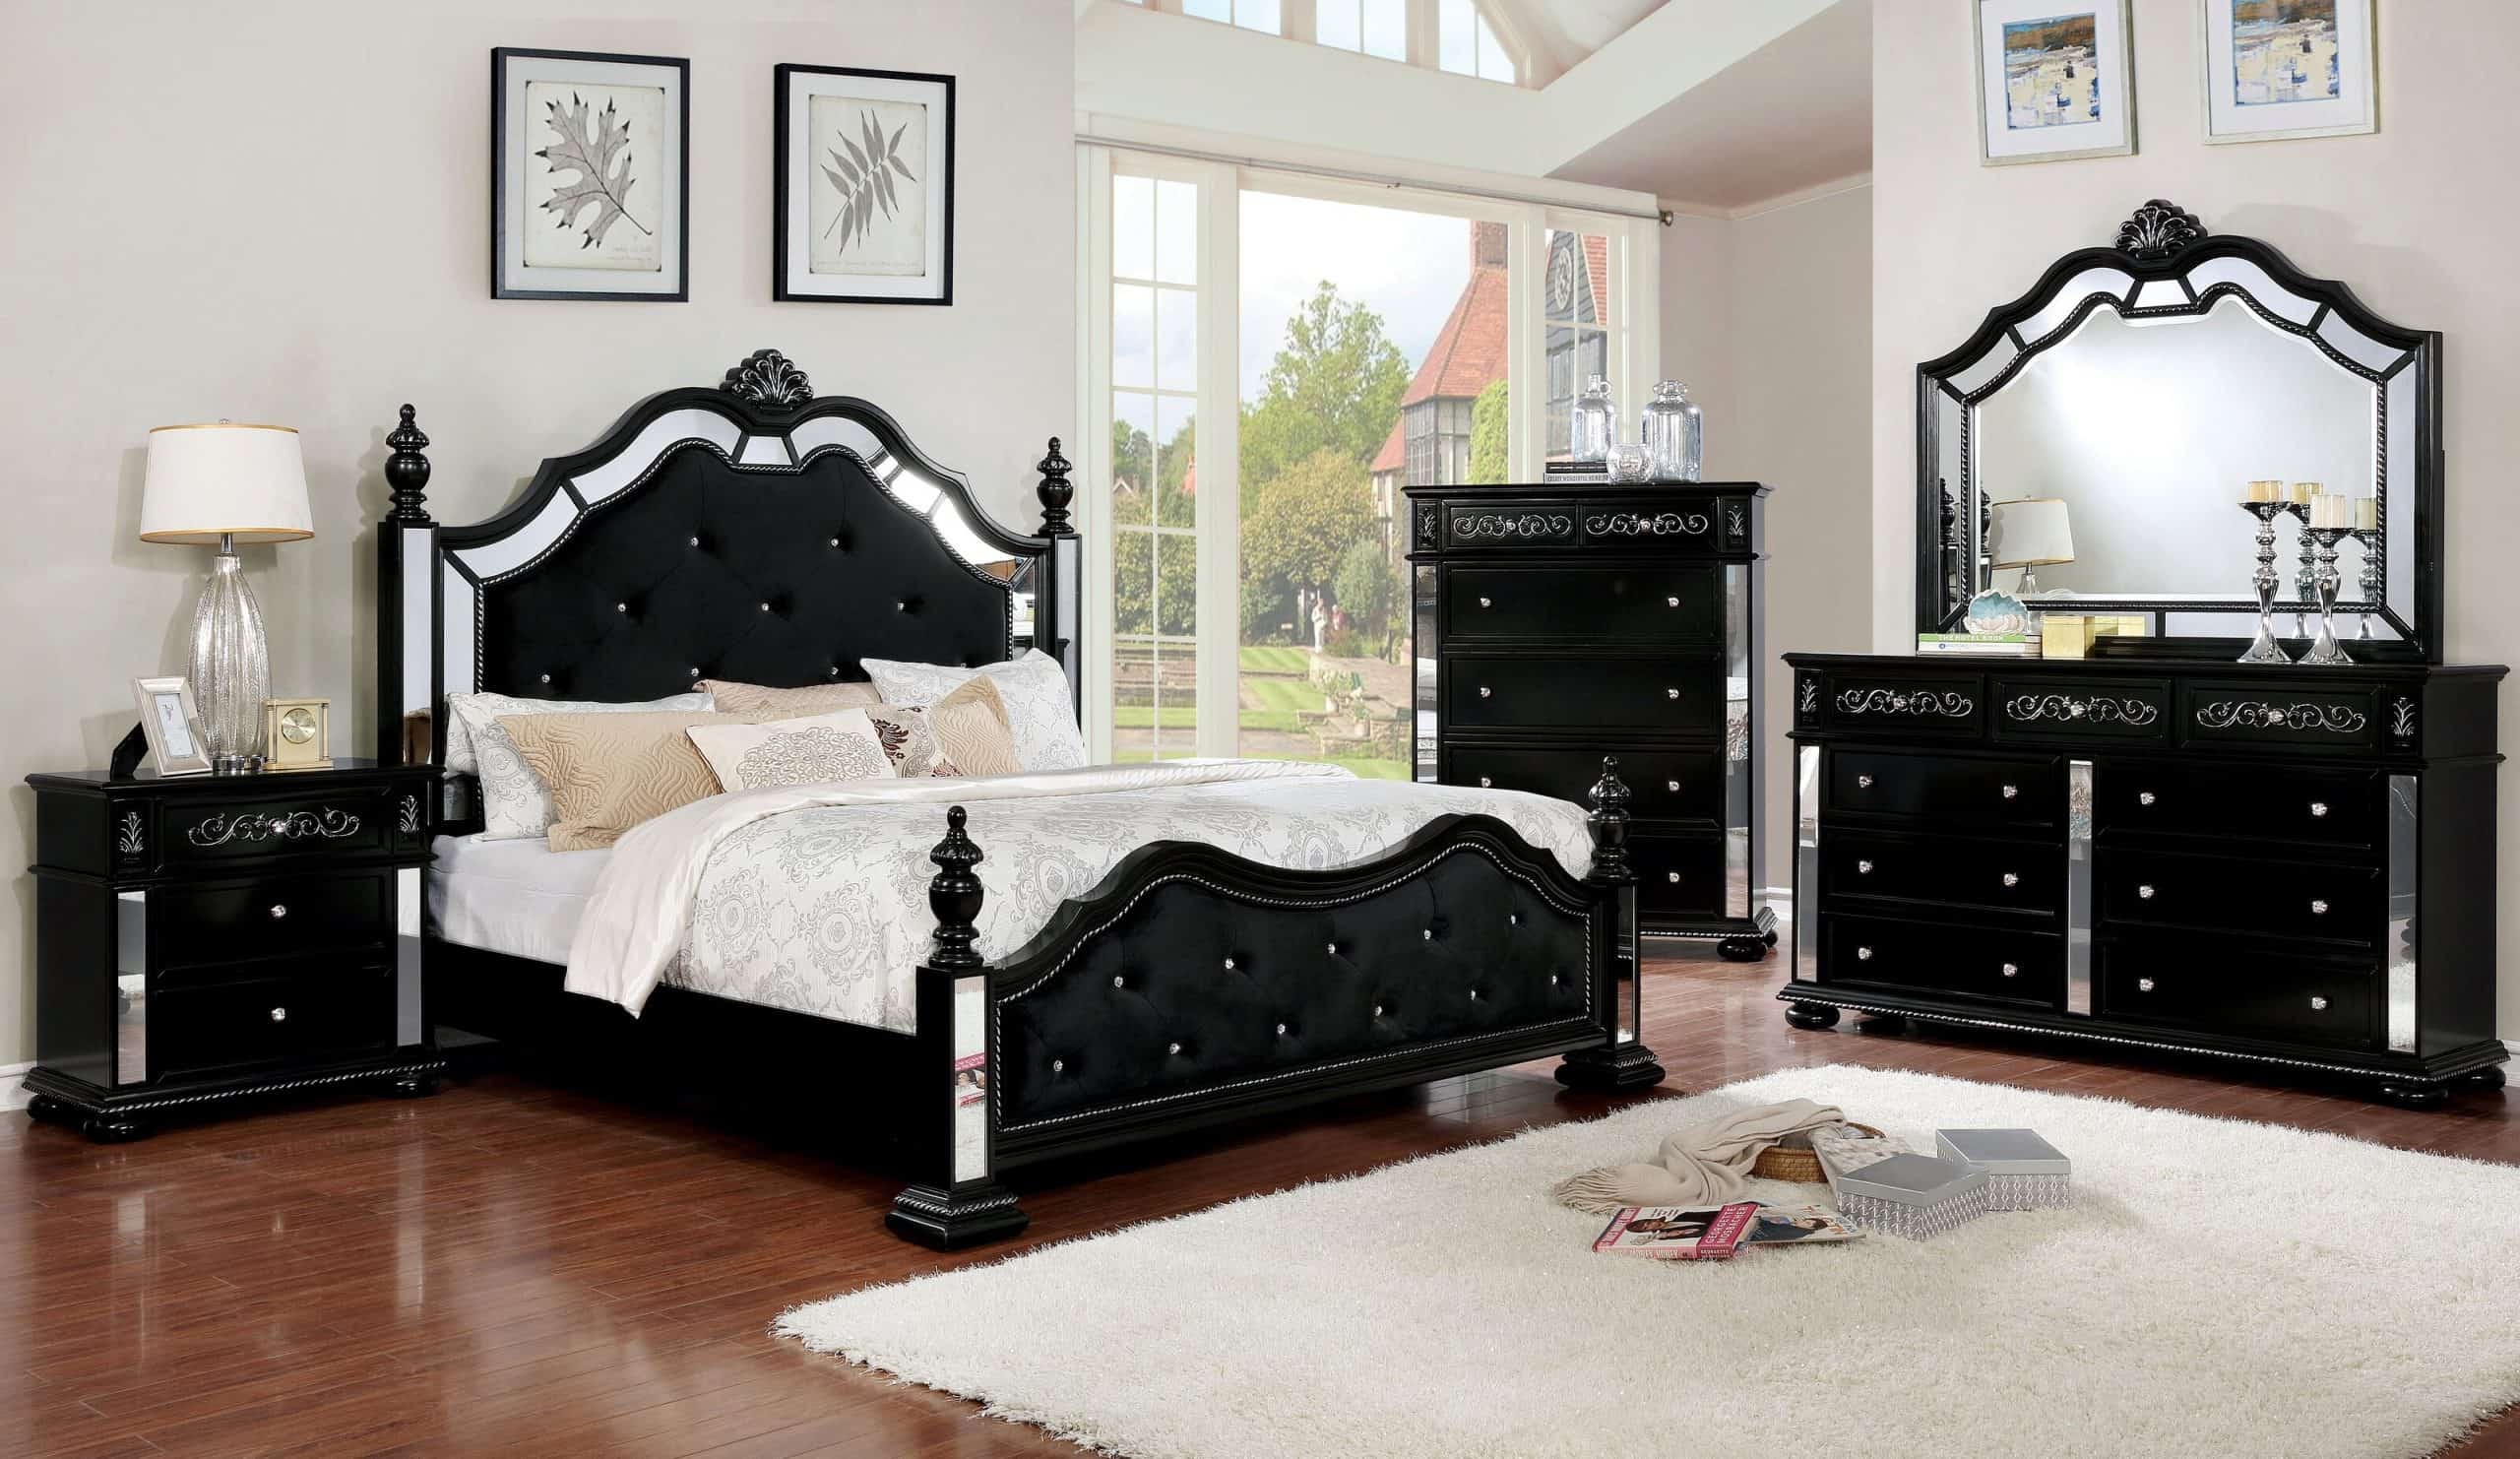 Add A Dash Of Chic With Lush Black Furniture